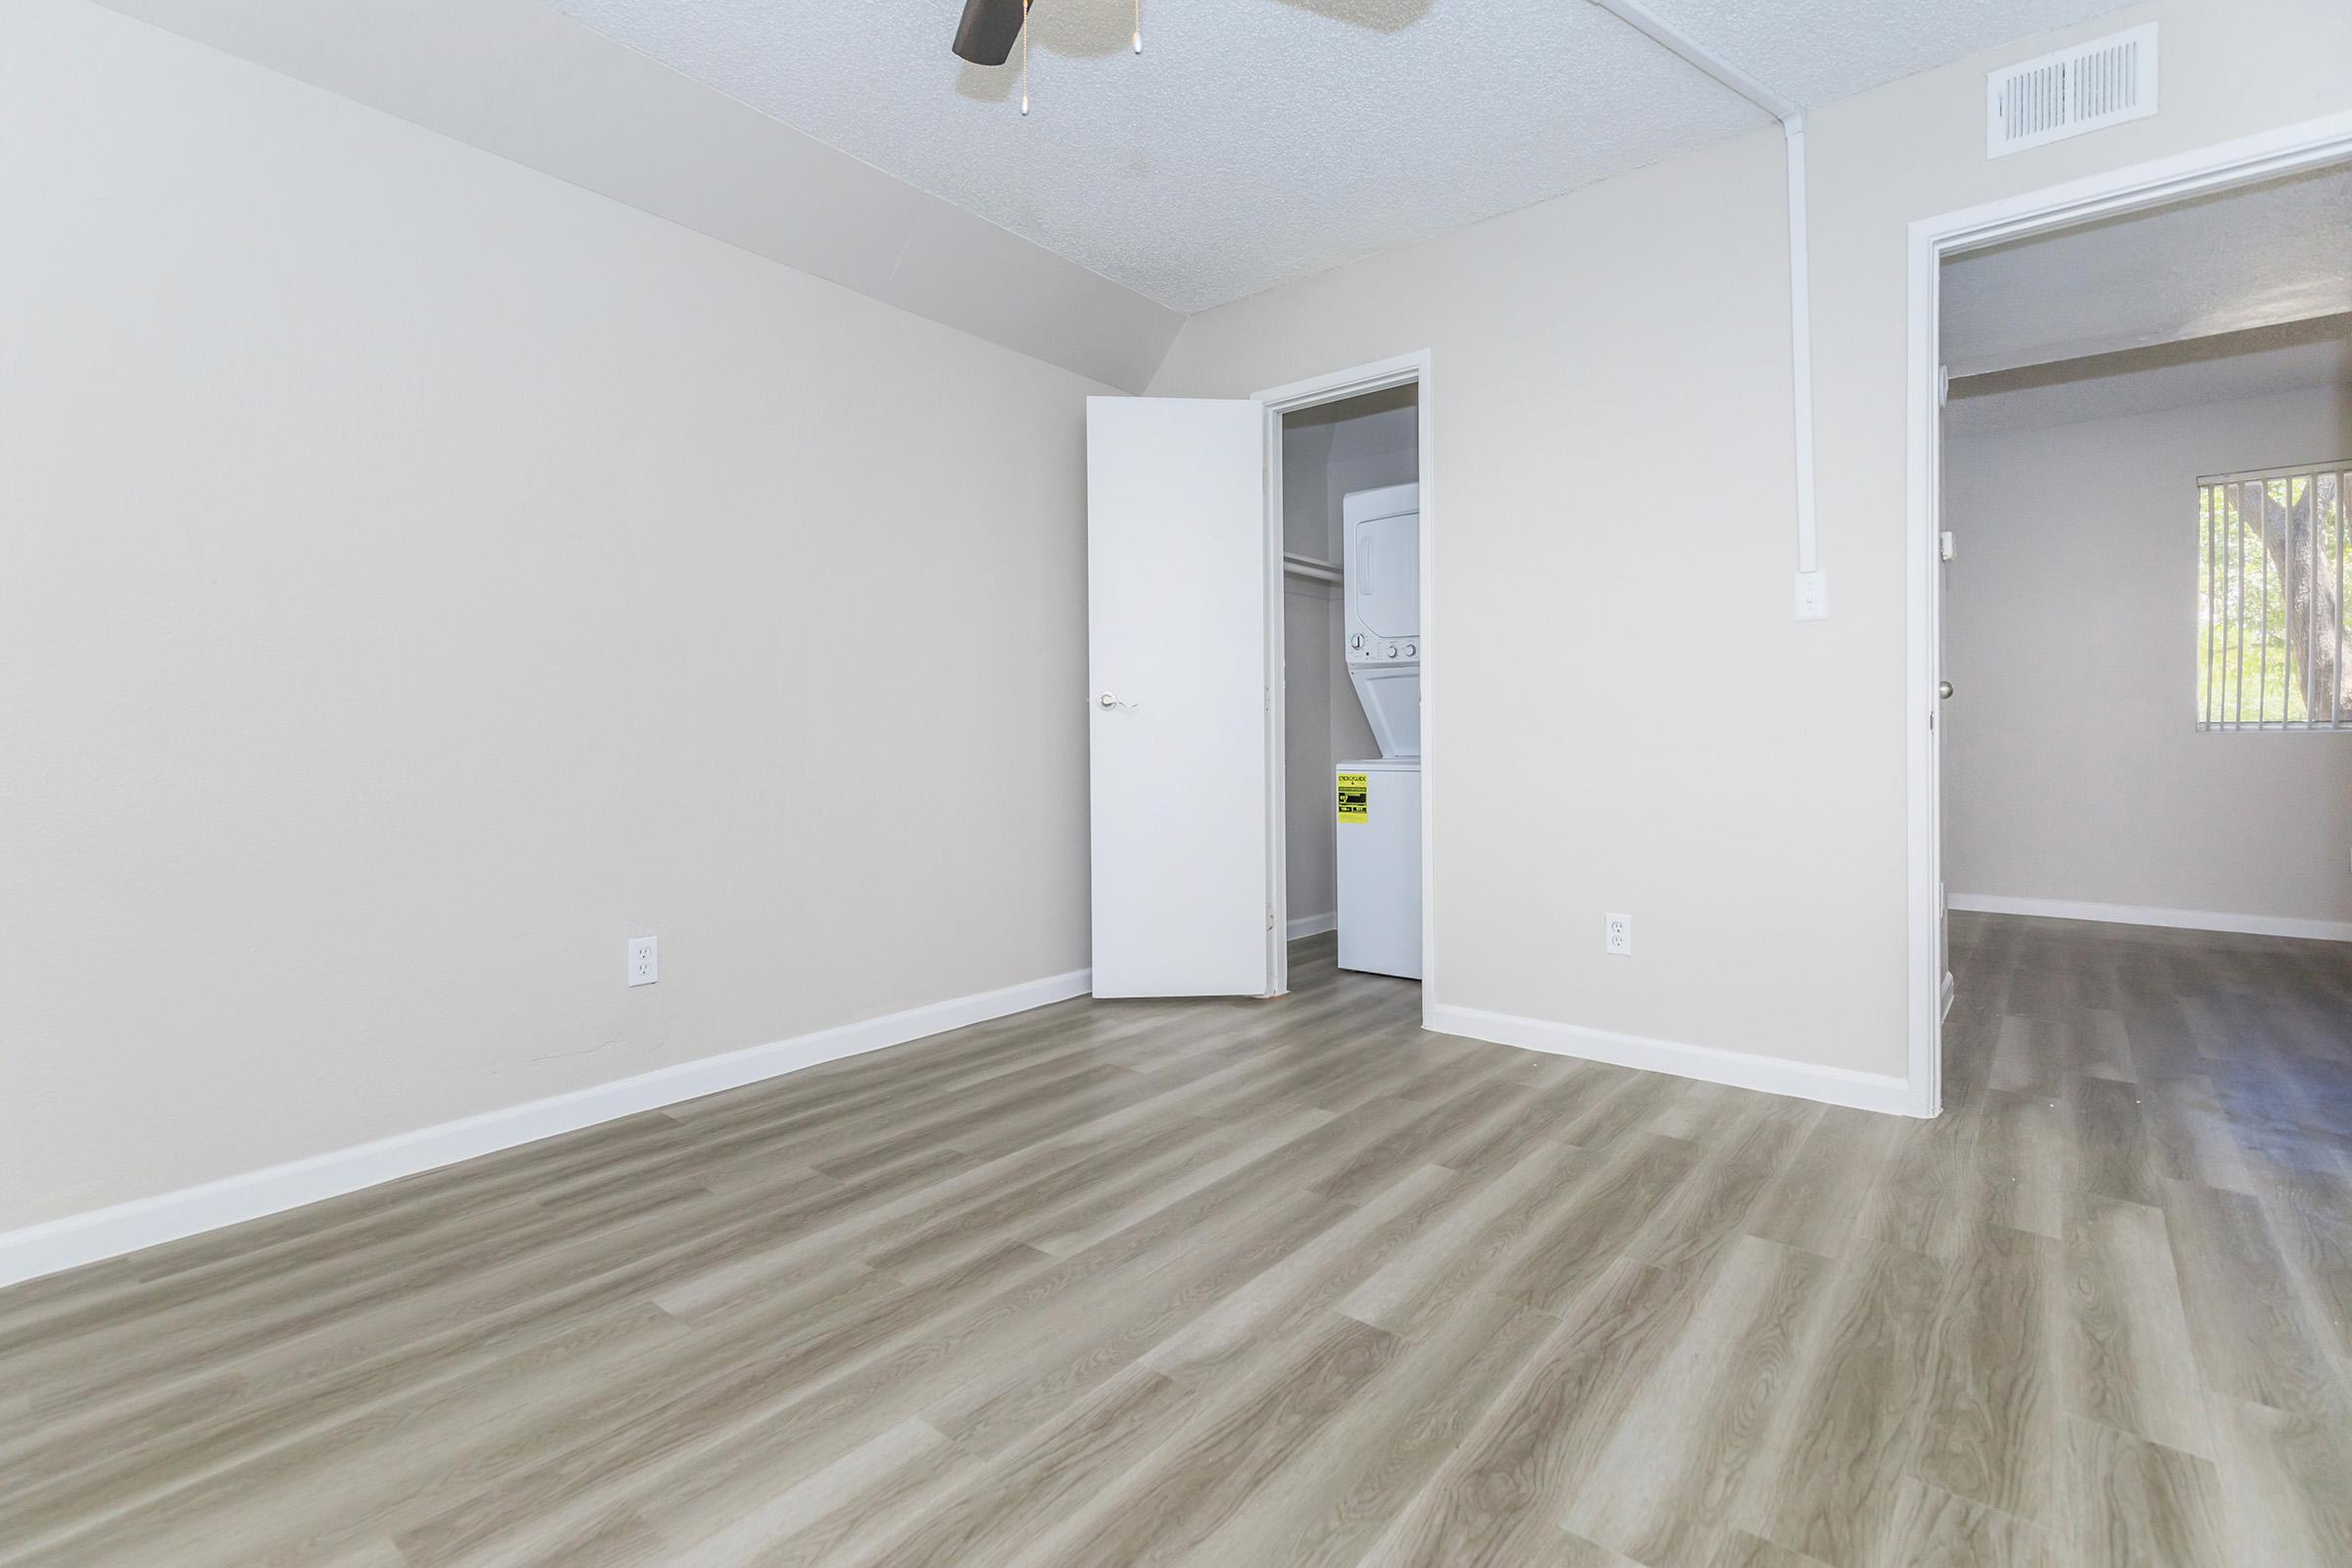 Large empty apartment floor plan with stacked washer and dryer in closet